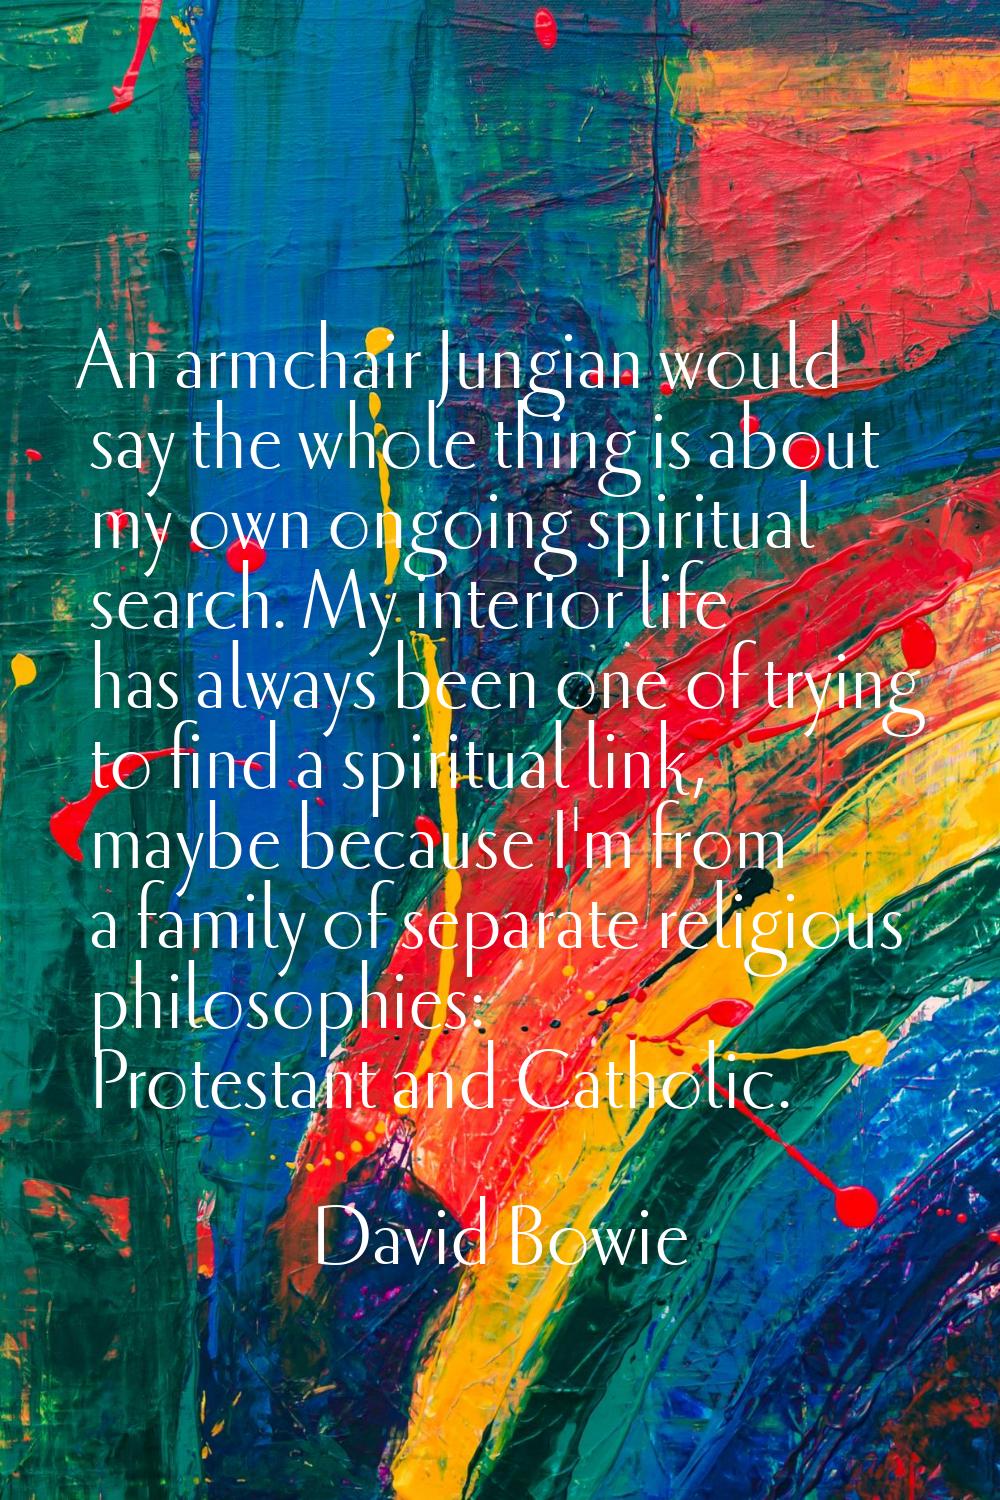 An armchair Jungian would say the whole thing is about my own ongoing spiritual search. My interior